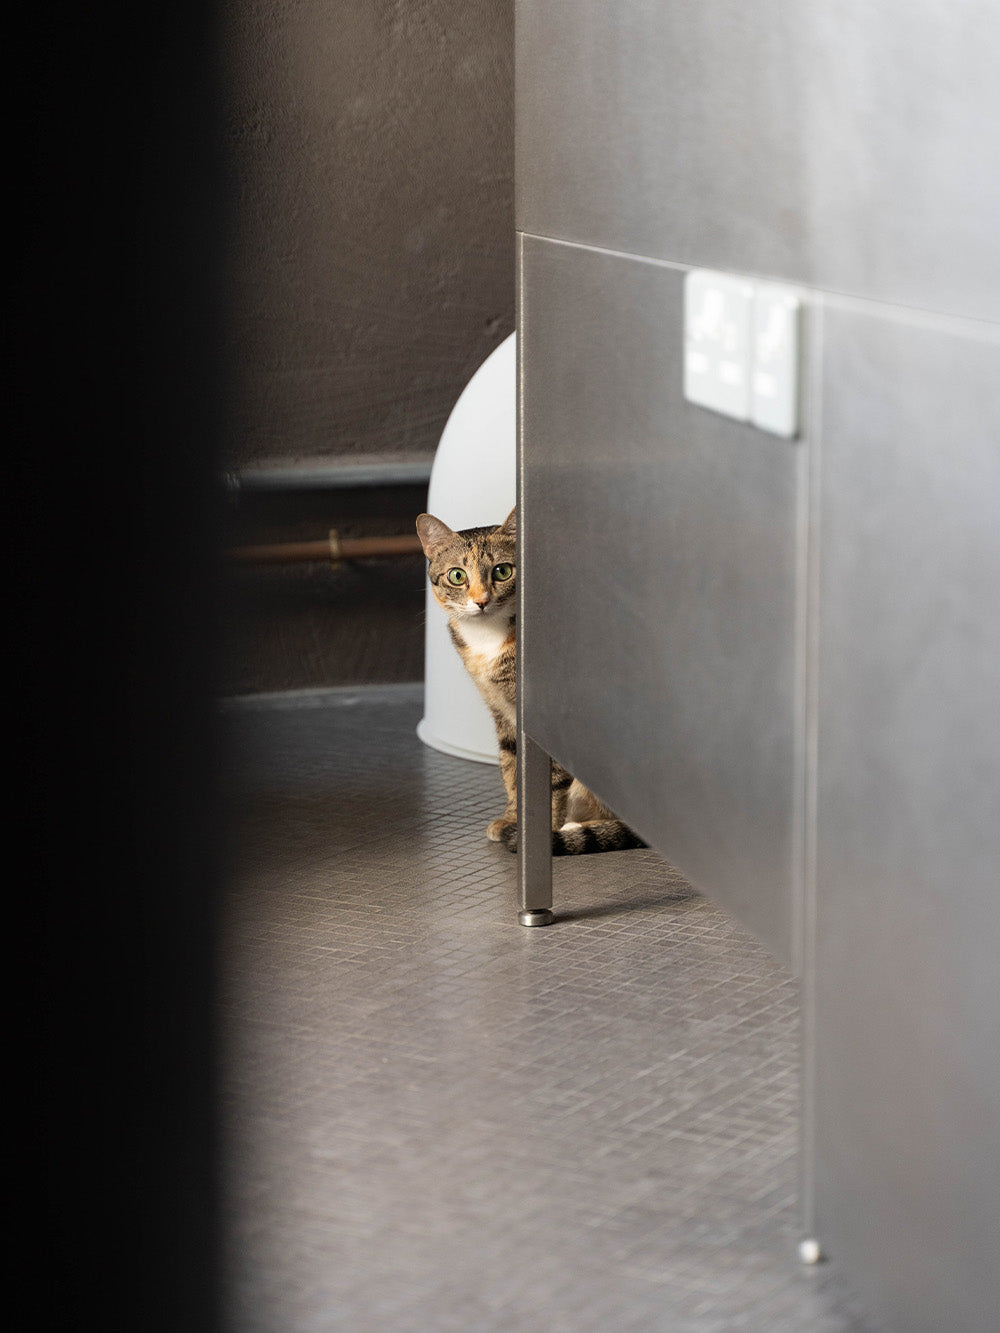 Cat peeking out from behind a cabinet